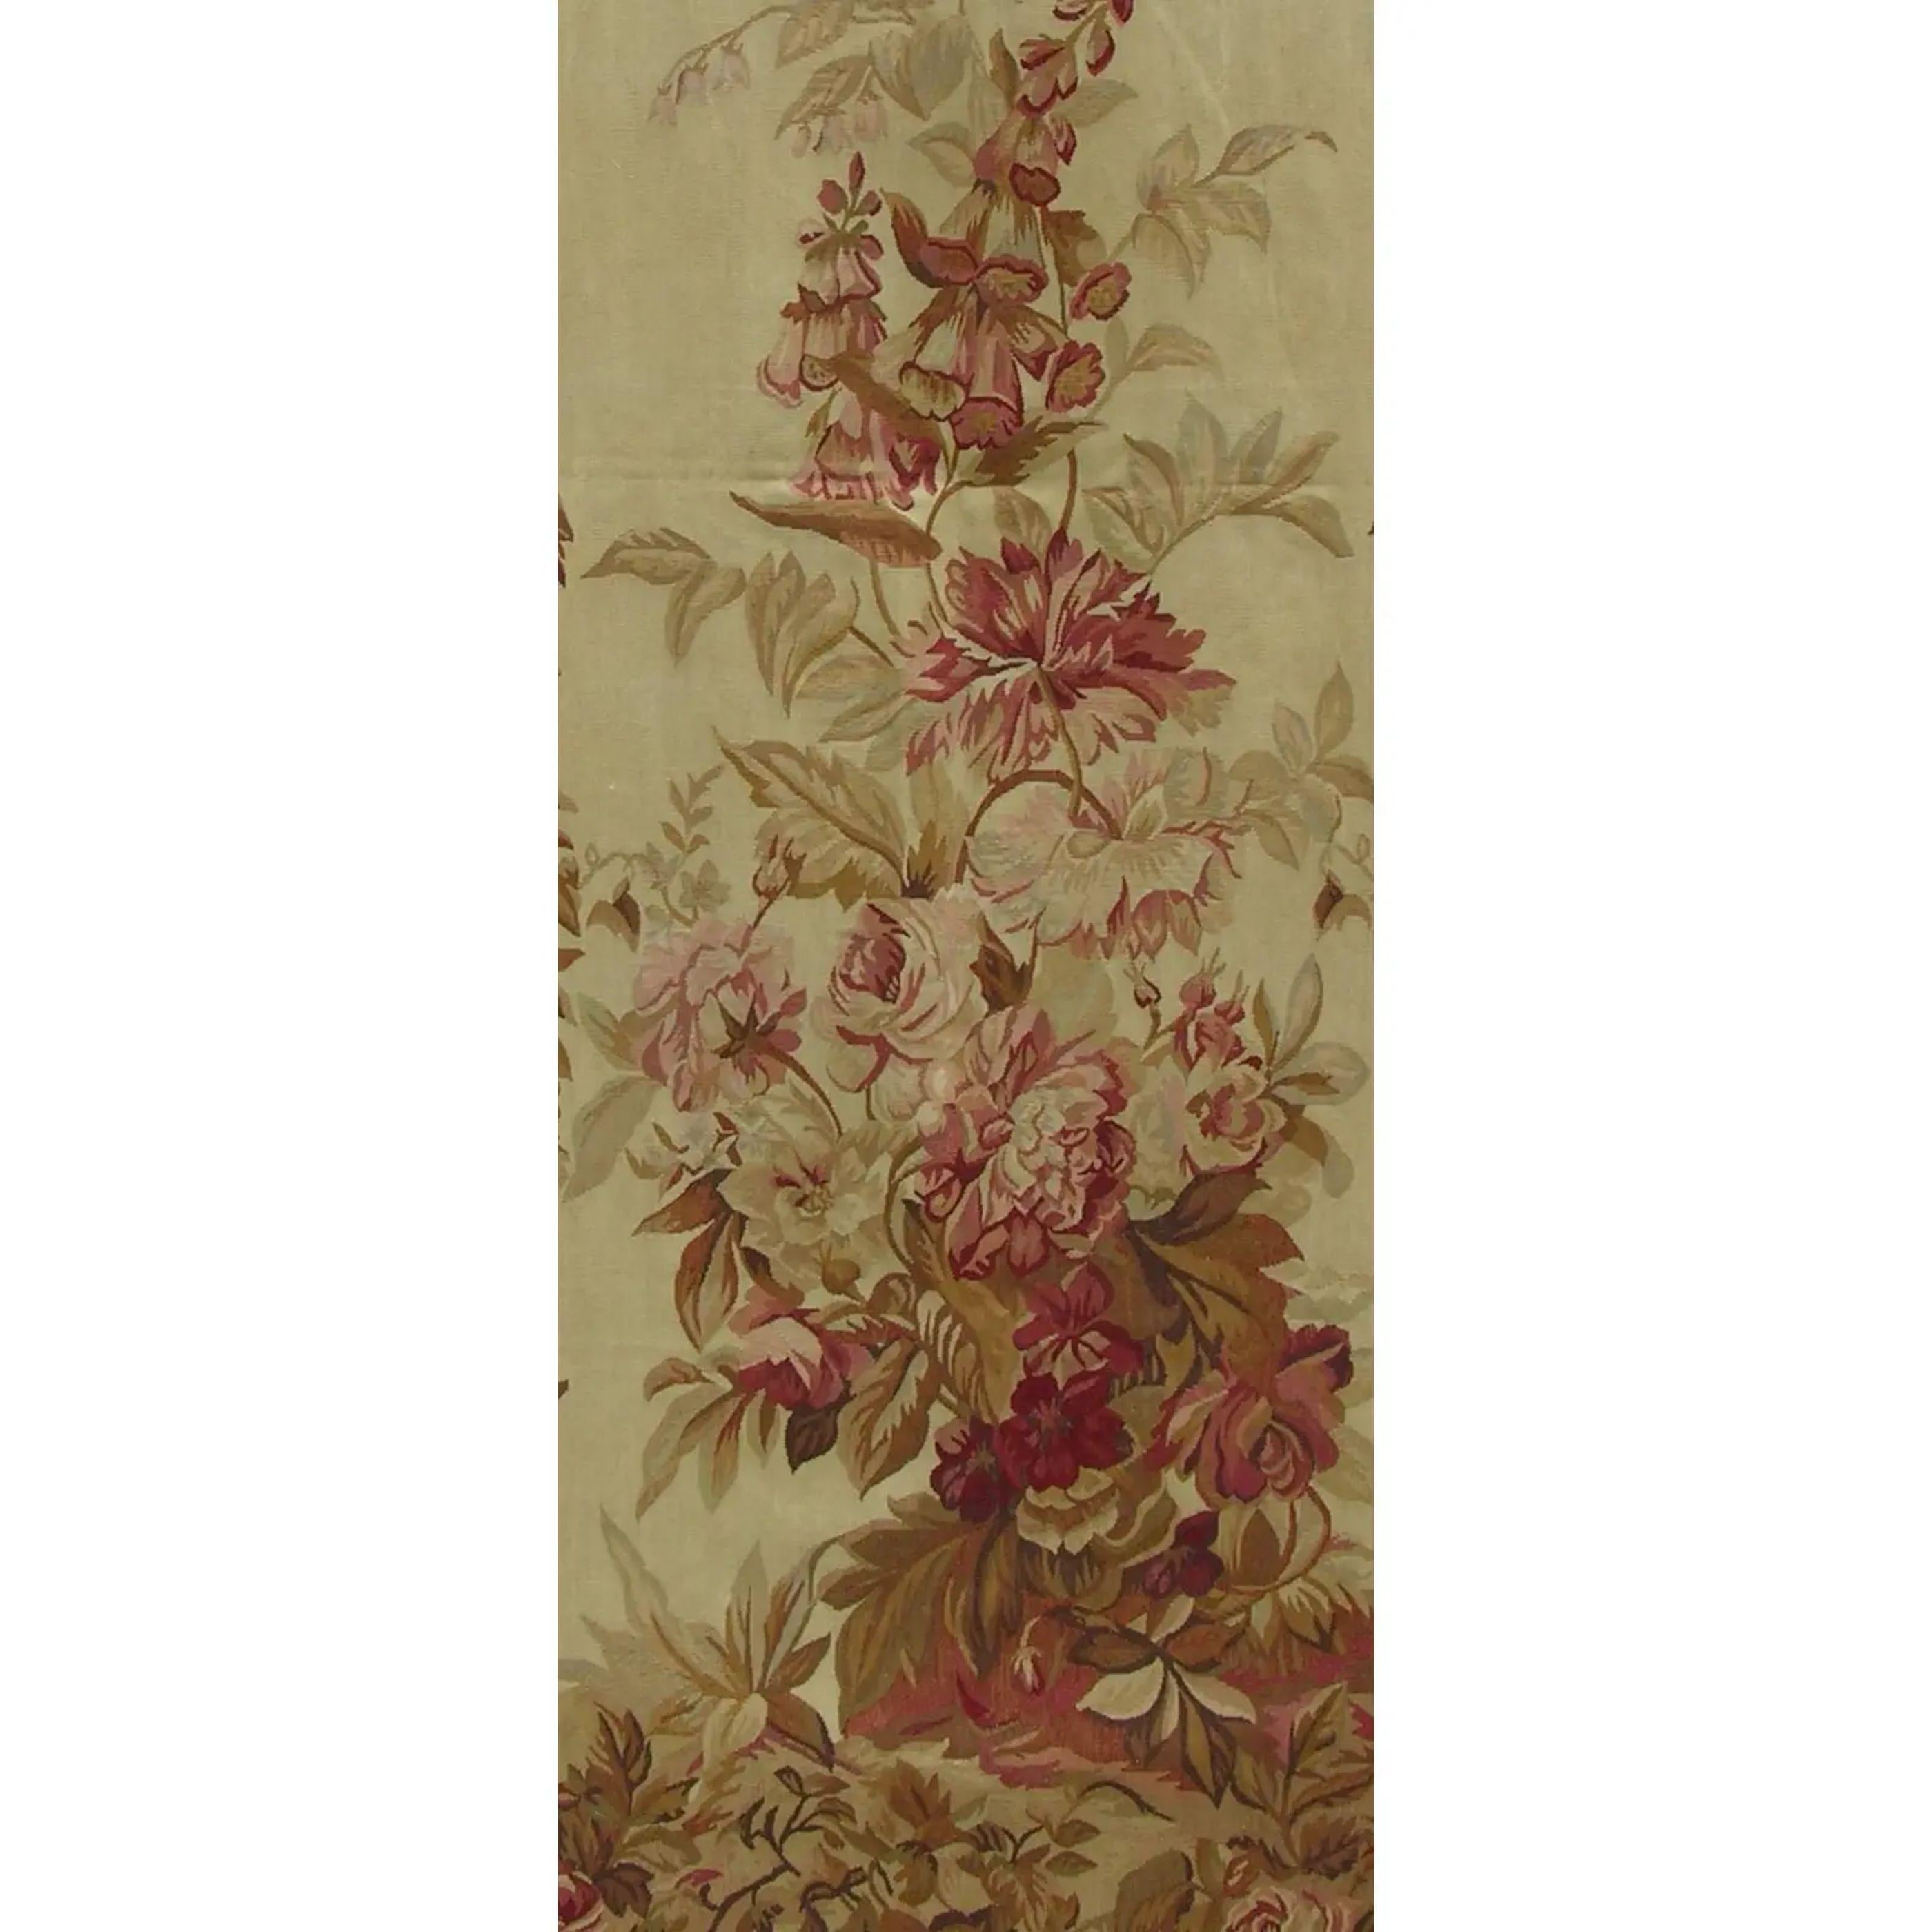 A wall hanging tapestry, simply put, is a textile specifically designed and woven to portray an artistic scene with the intent of hanging it on a wall. Antique tapestries, those that were woven over 100 years ago, are highly sought after collectible